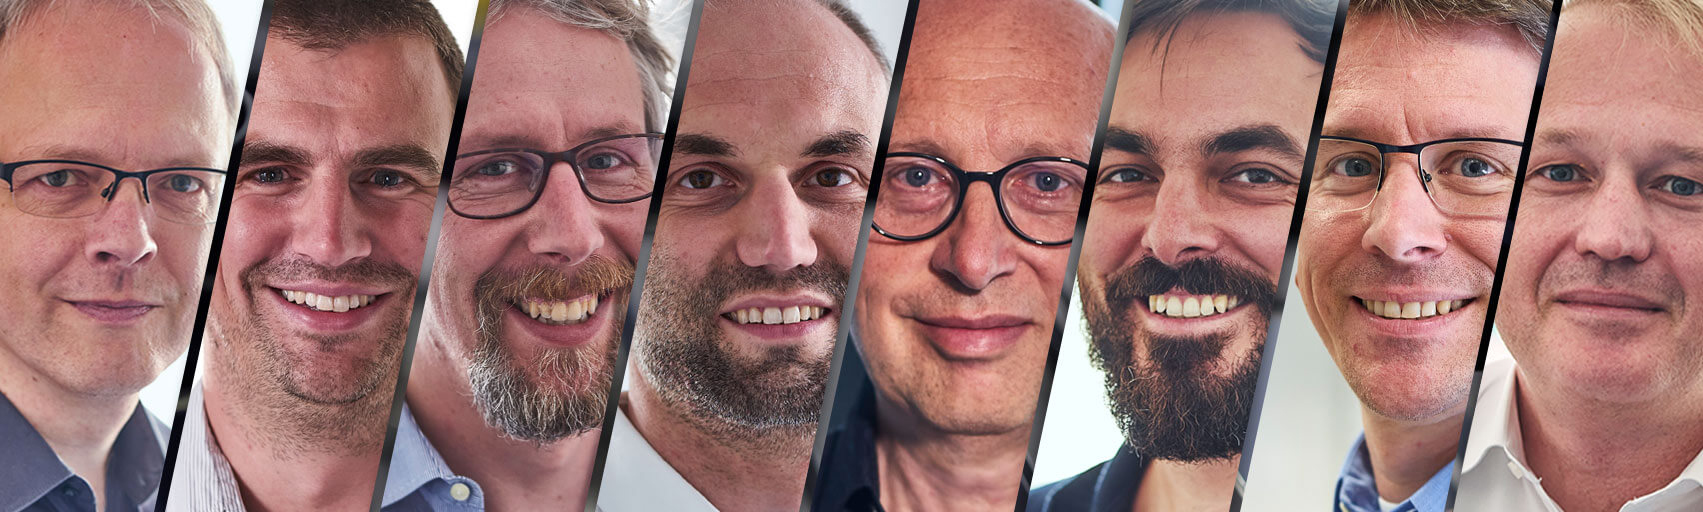 Closely juxtaposed portrait photos of the 8 founders of abberior, cropped at an angle.